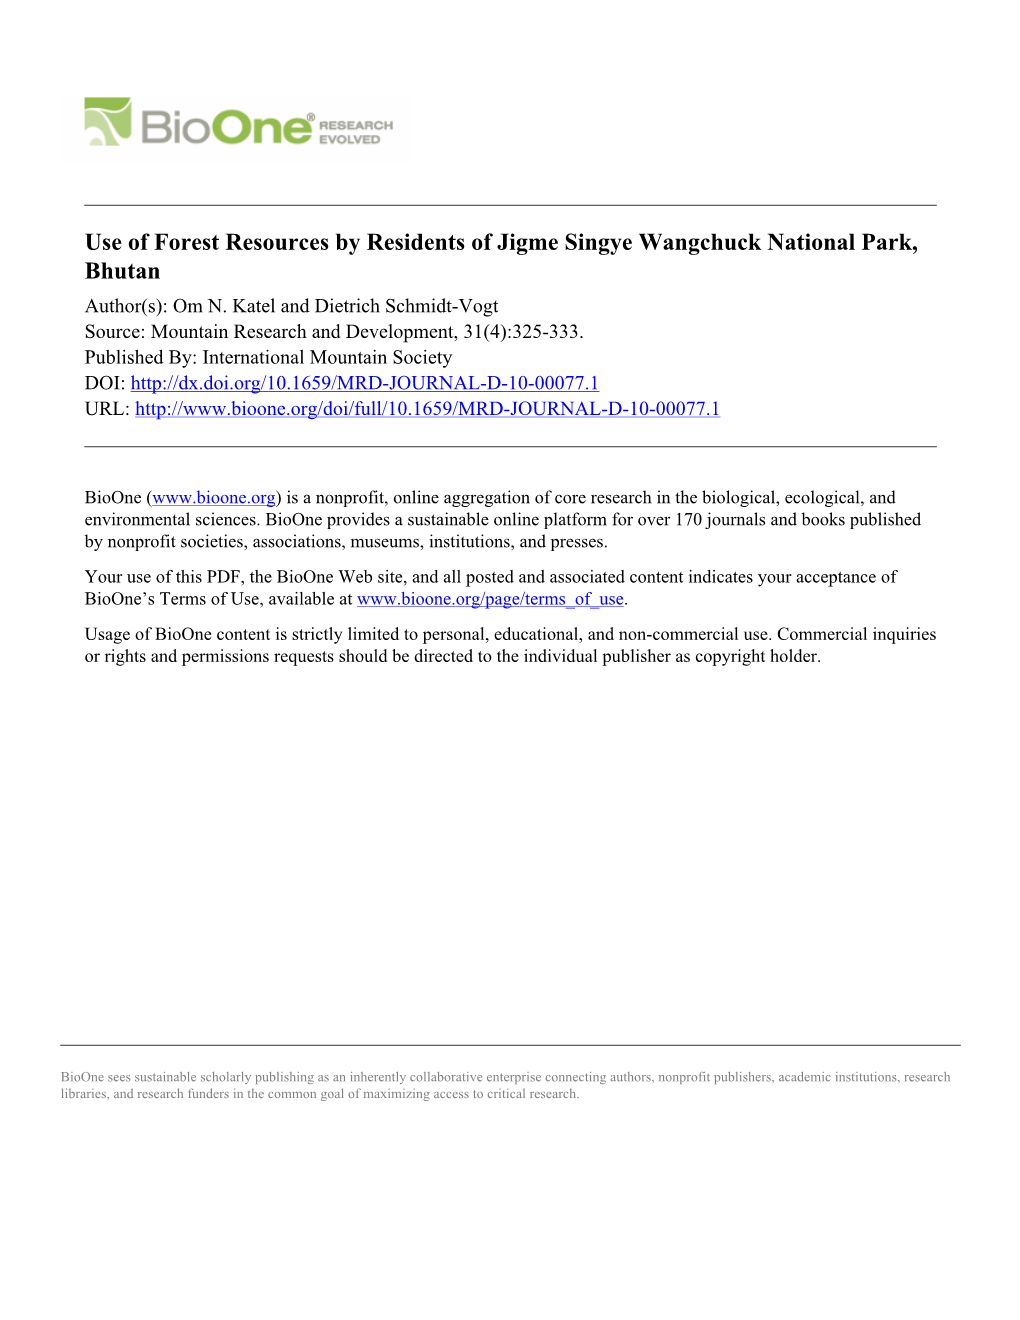 Use of Forest Resources by Residents of Jigme Singye Wangchuck National Park, Bhutan Author(S): Om N